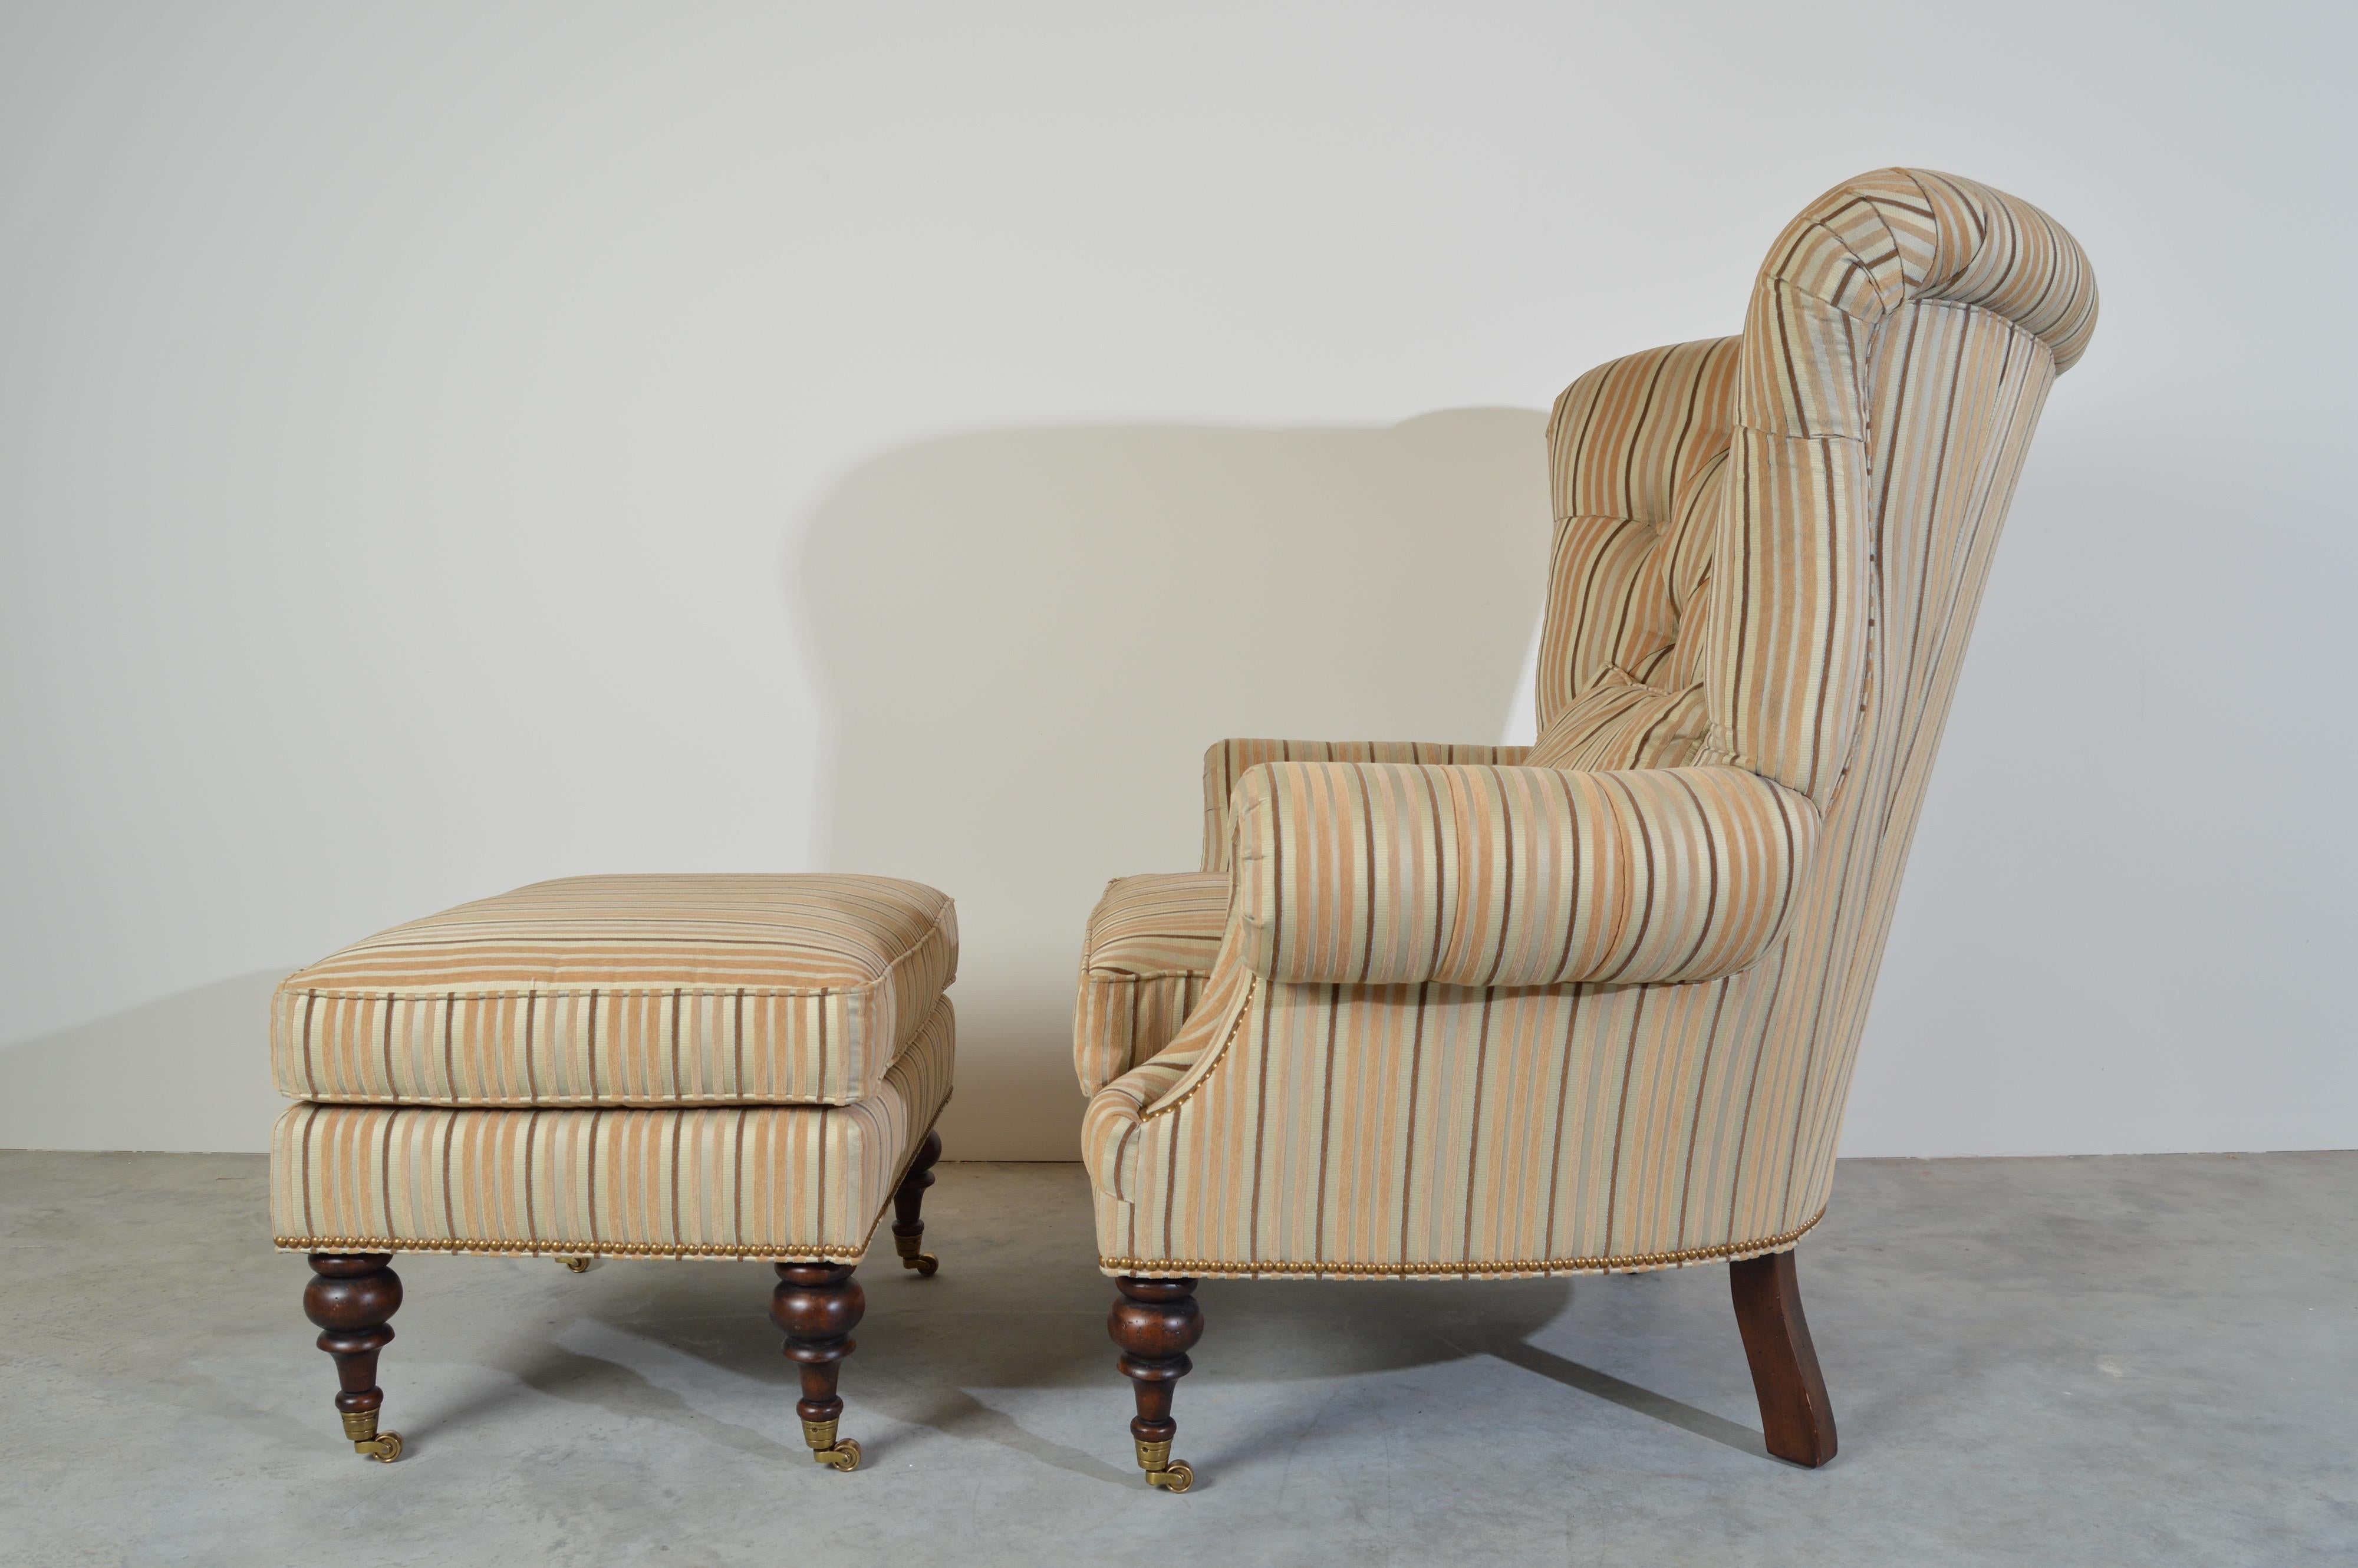 Oversized Louis XV style tufted wingback lounge chair and ottoman by EJ Victor having solid brass casters, fabulous mohair lined upholstery in stunning condition.
A remarkably comfortable set.
Very clean and ready for use!
Original MSRP